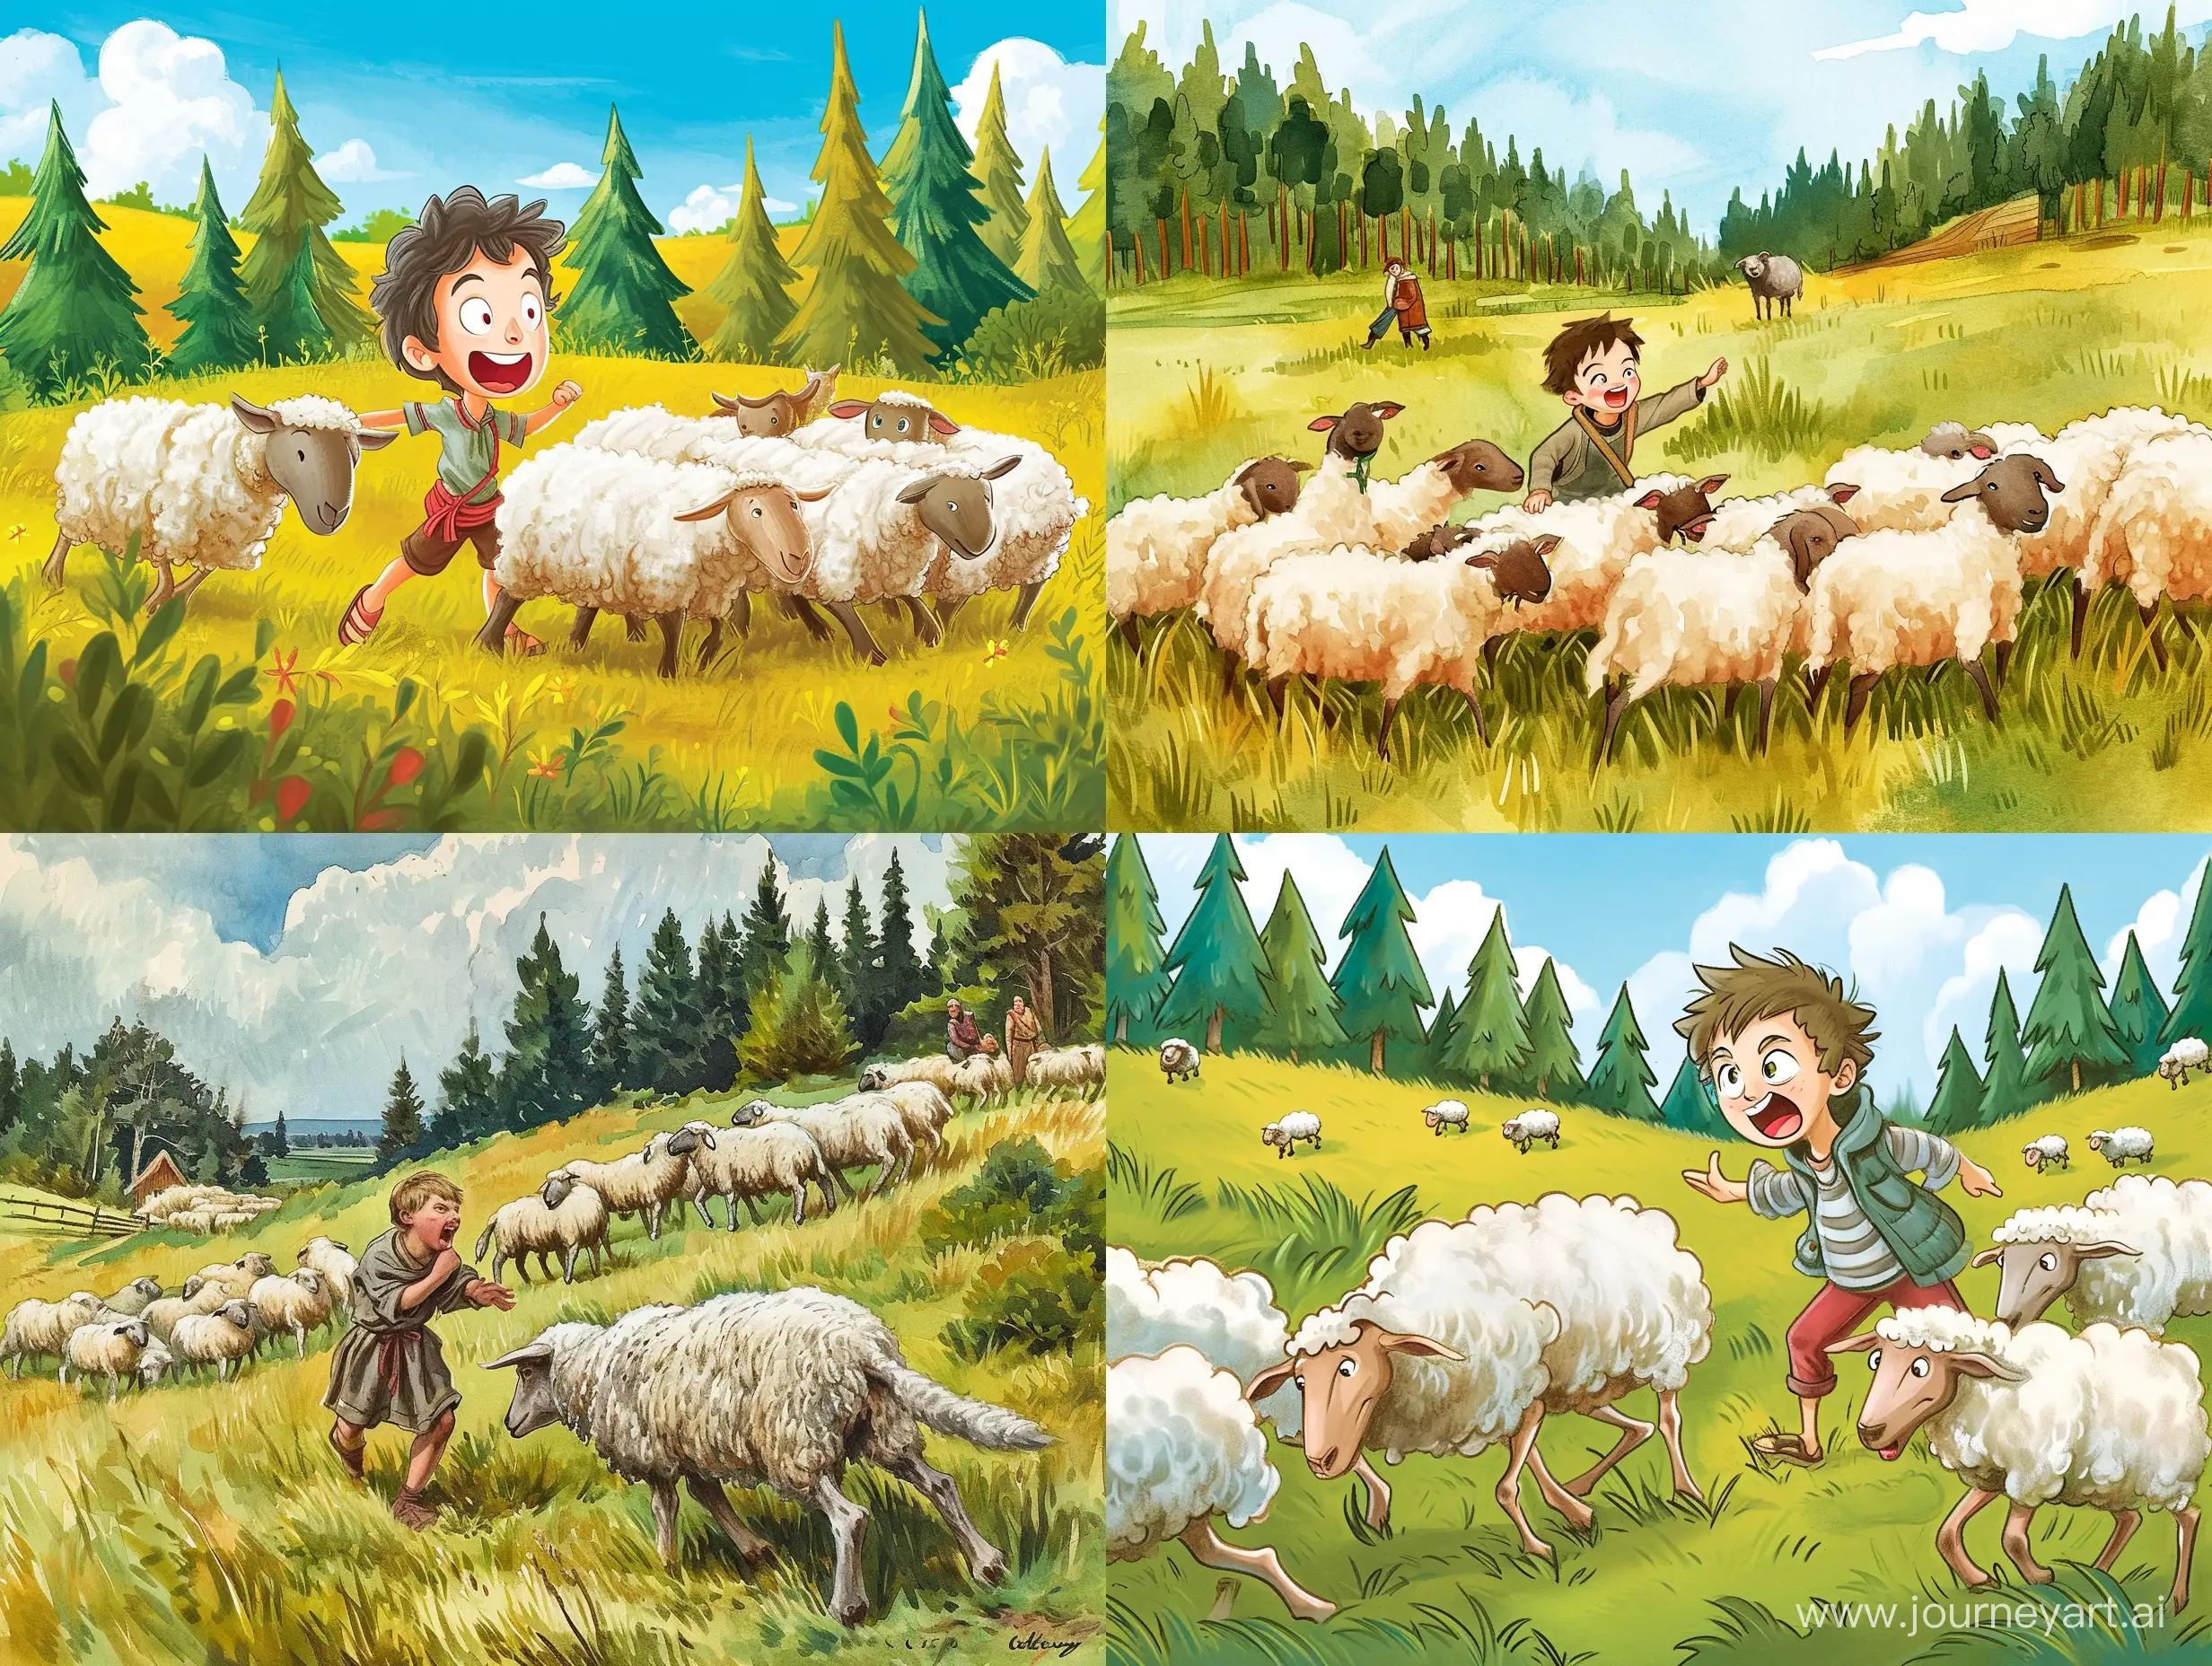 A shepherd boy in a village used to take his herd of sheep across the fields near the forest. He felt this job was very dull and wanted to have some fun. One day while grazing the sheep, he shouted, "Wolf! Wolf! The wolf is carrying away a lamb!" Farmers working in the nearby fields came running for help but didn’t find any wolf. The boy laughed and replied, "It was just fun. There is no wolf here". 

The boy played a similar trick repeatedly for many days. After some days, while the shepherd boy was in the field with the herd of sheep, suddenly, a wolf came out from the nearby forest and attacked one of the lambs. The boy was frightened and cried loudly, "Wolf! Wolf! The wolf is carrying a lamb away!" The farmers thought the boy was playing mischief again. So, no one paid attention to him and didn’t come to his help. 